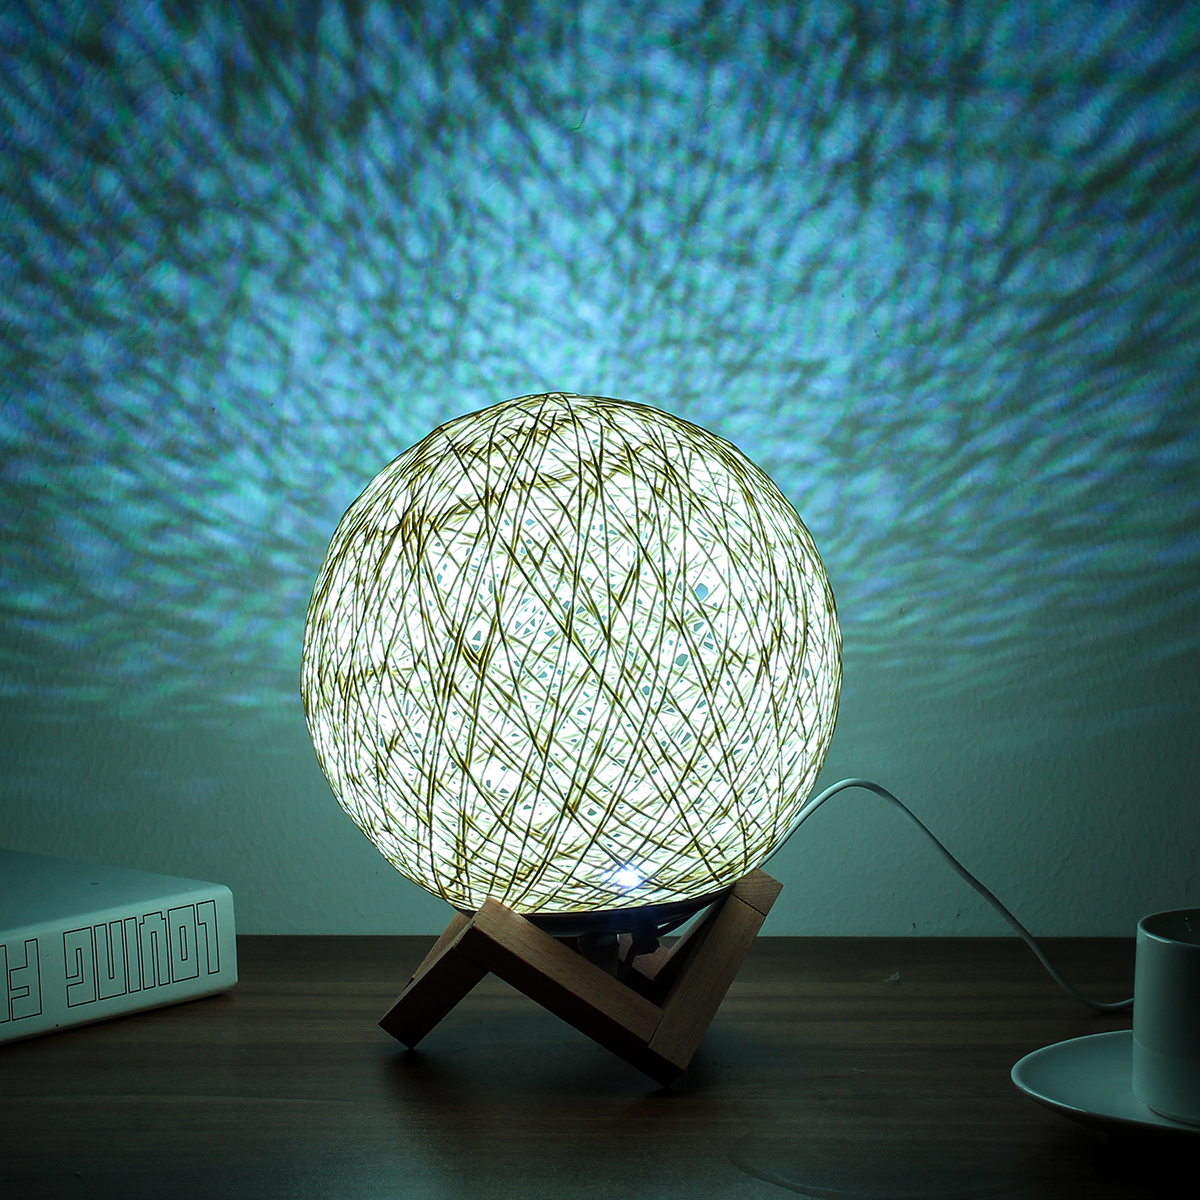 USB-Wooden-Rattan-Table-Light-Dimming-Desk-Bedroom-Night-LED-Ball-Home-Decorations-1627078-3